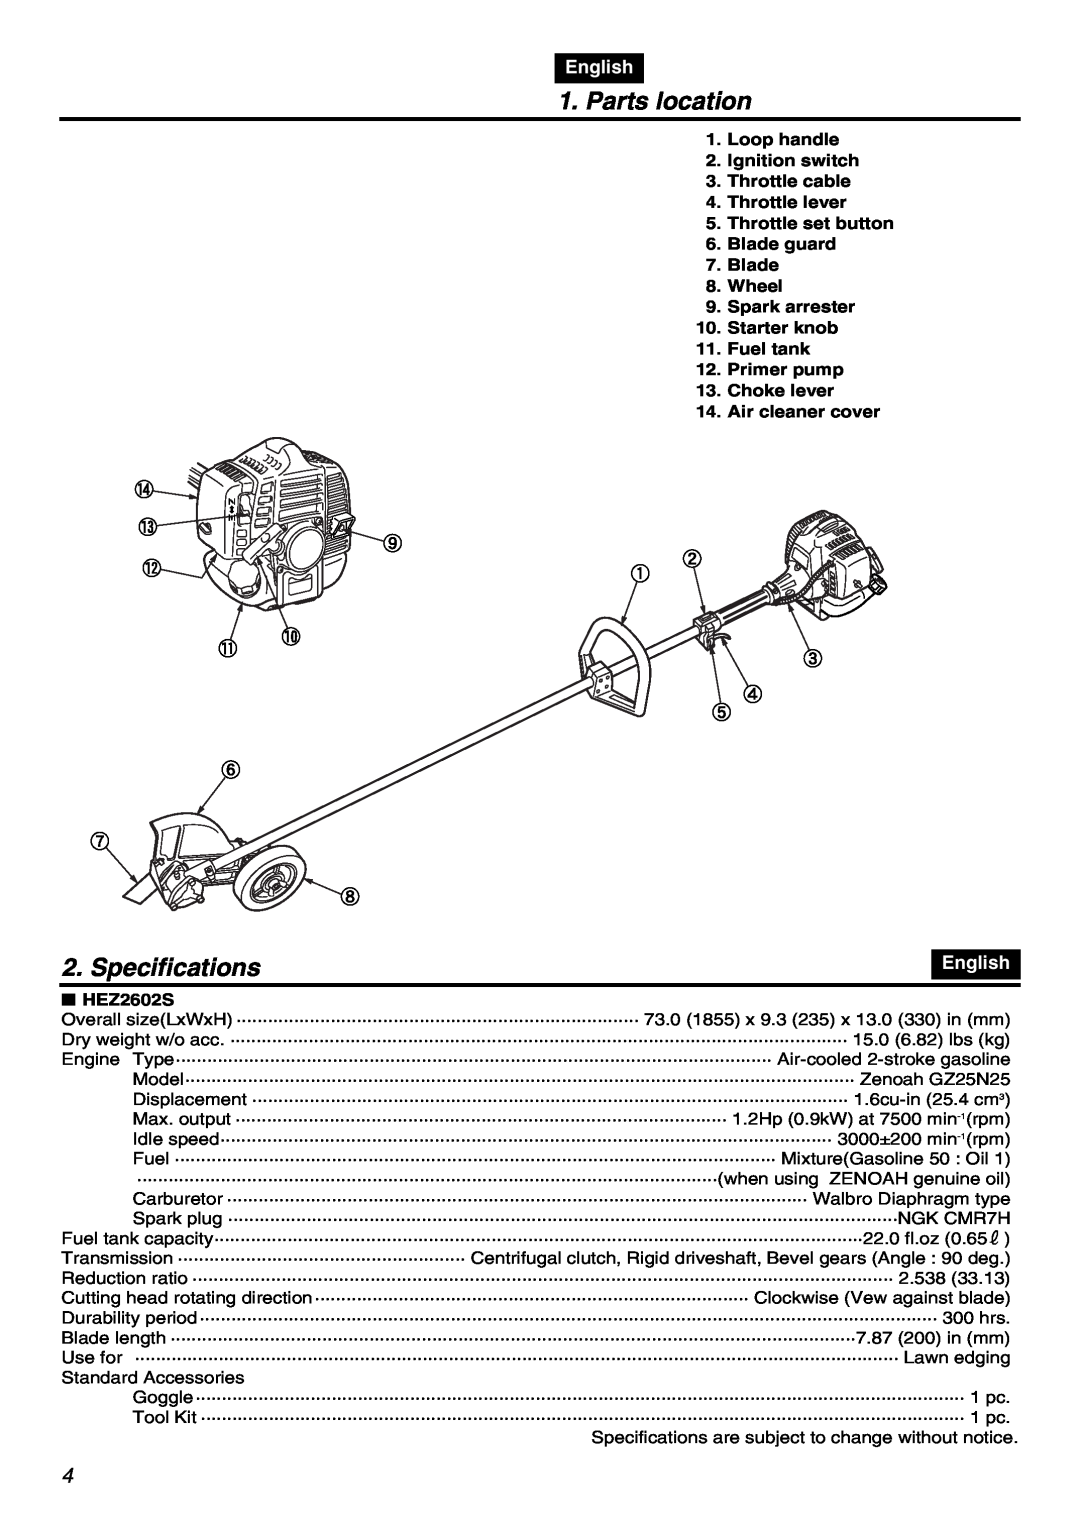 Zenoah HEZ2602S manual Parts location, English, Specifications are subject to change without notice 